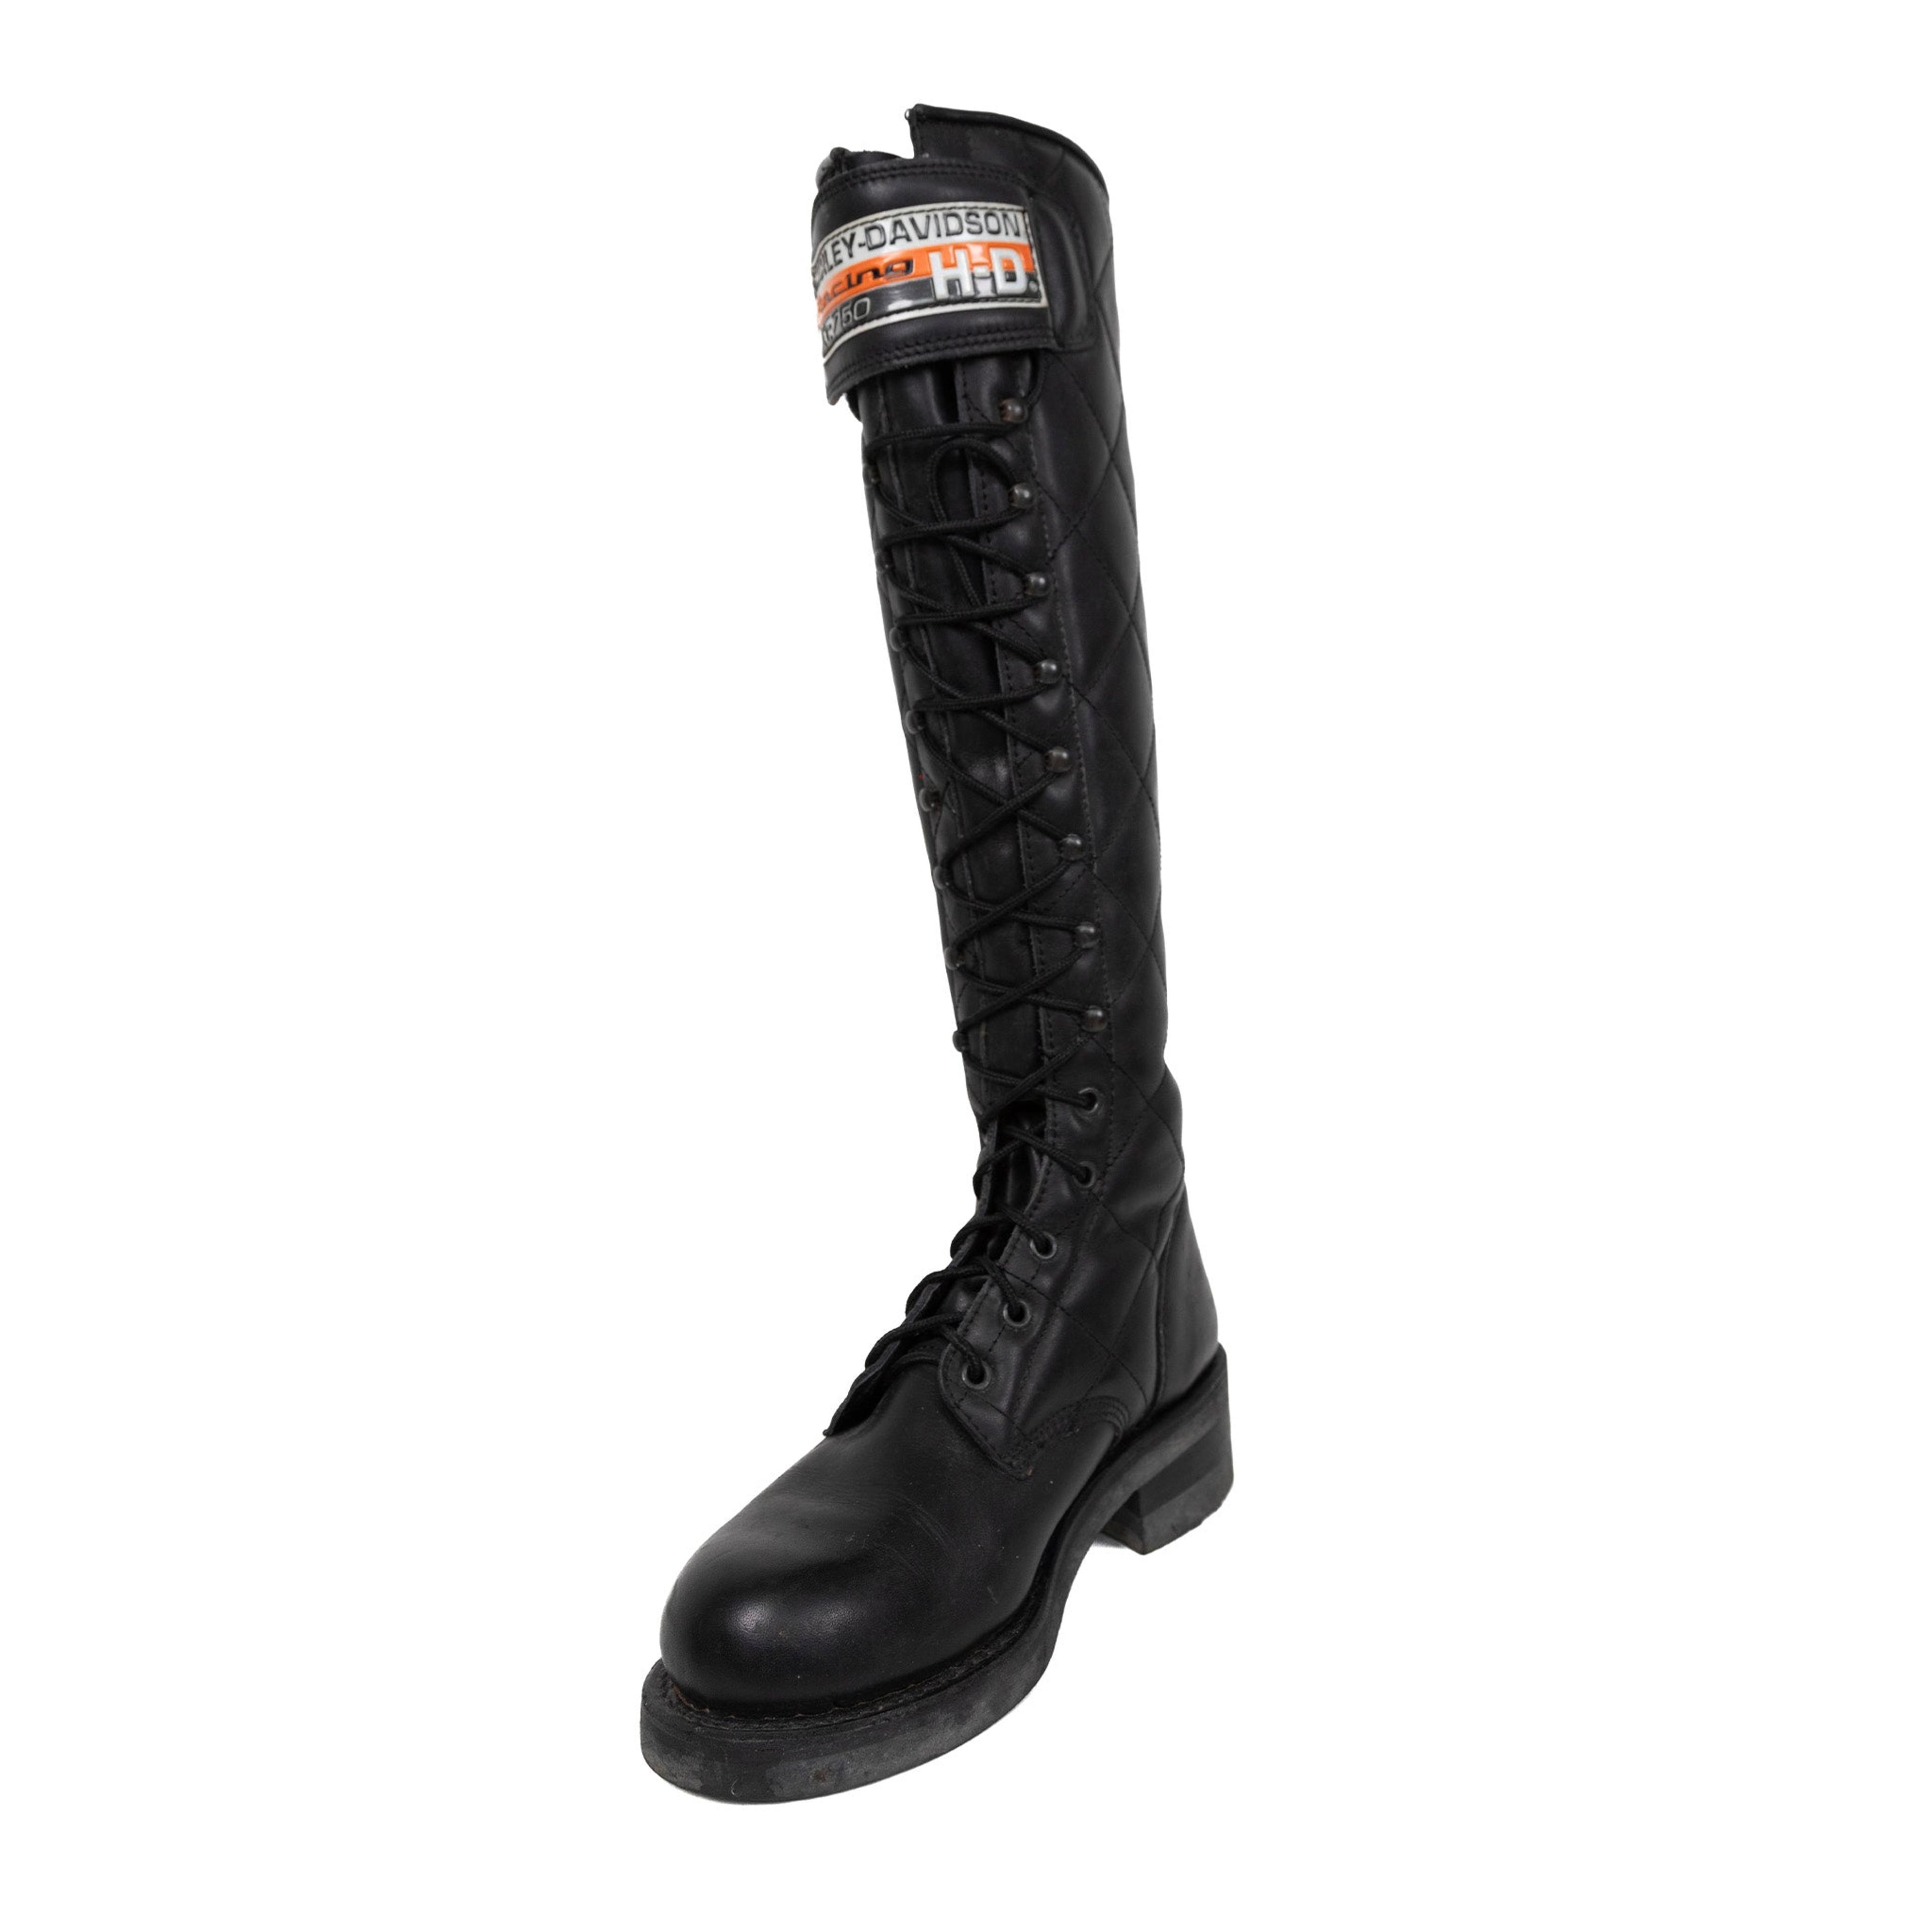 Alternate View 3 of Harley Davidson Racing XR750 Lace Up Biker Boots